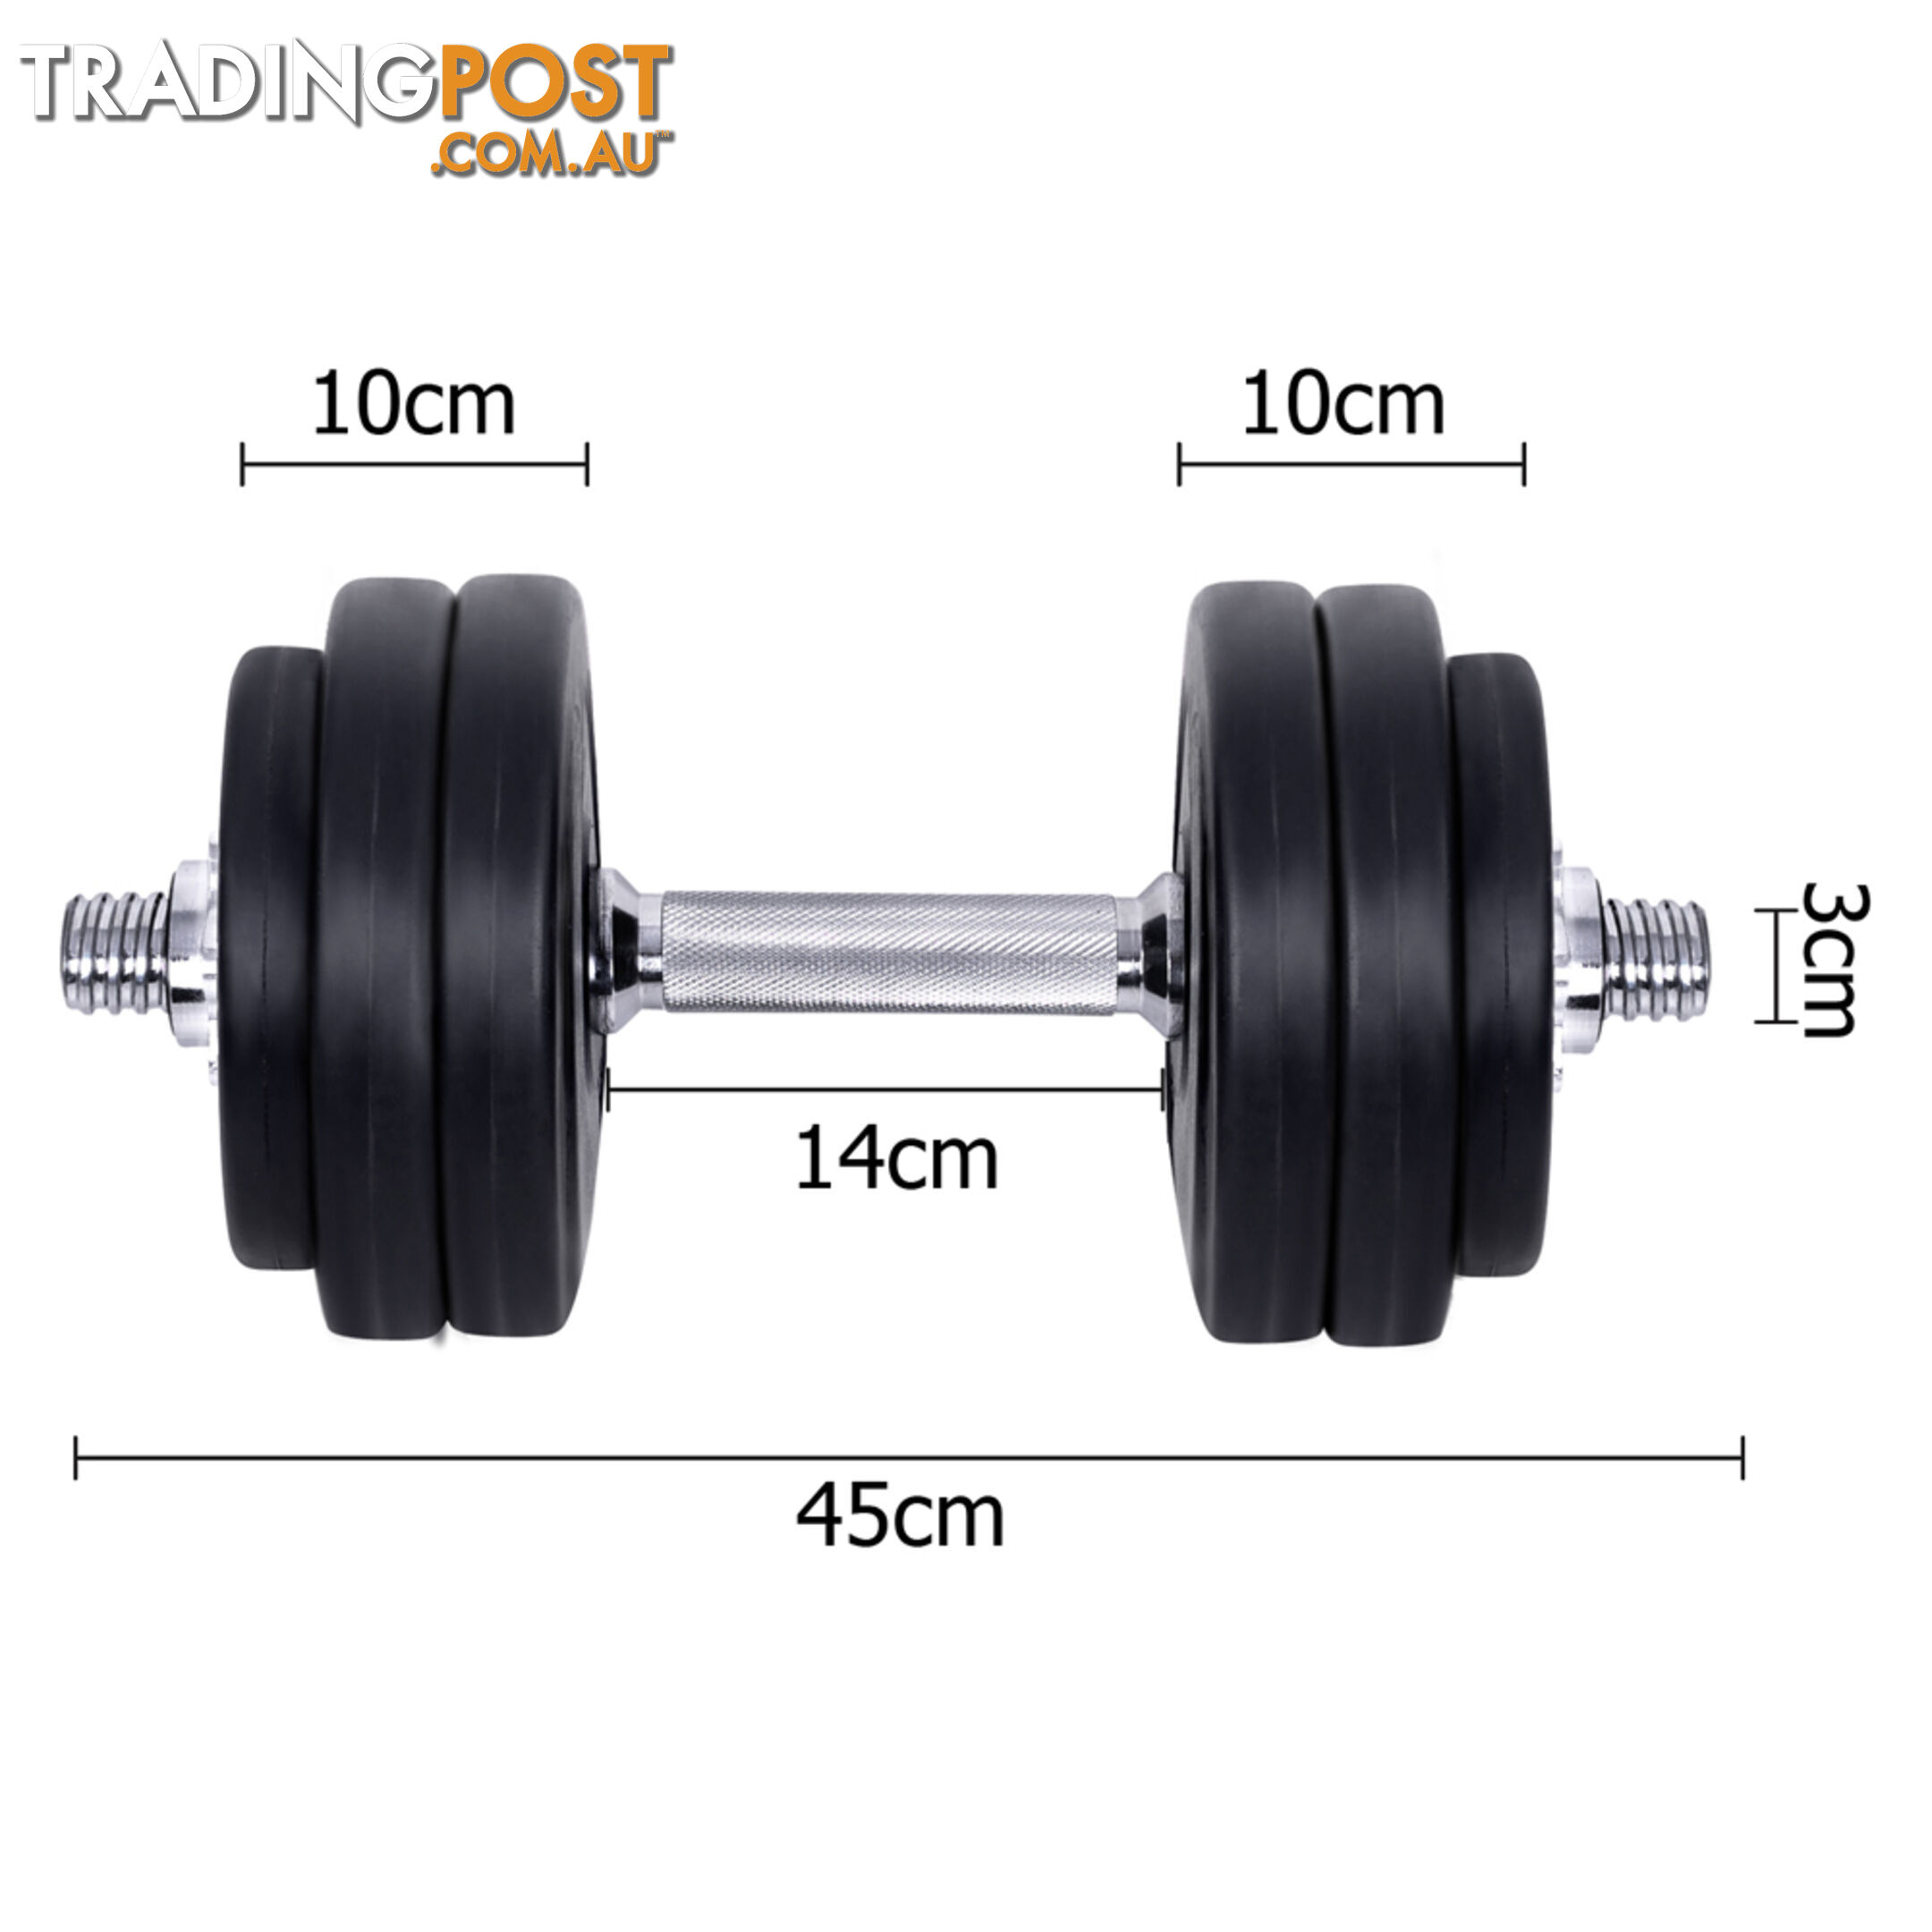 30KG Dumbbell Set Home Gym Fitness Exercise Body Workout Adjustable Weights